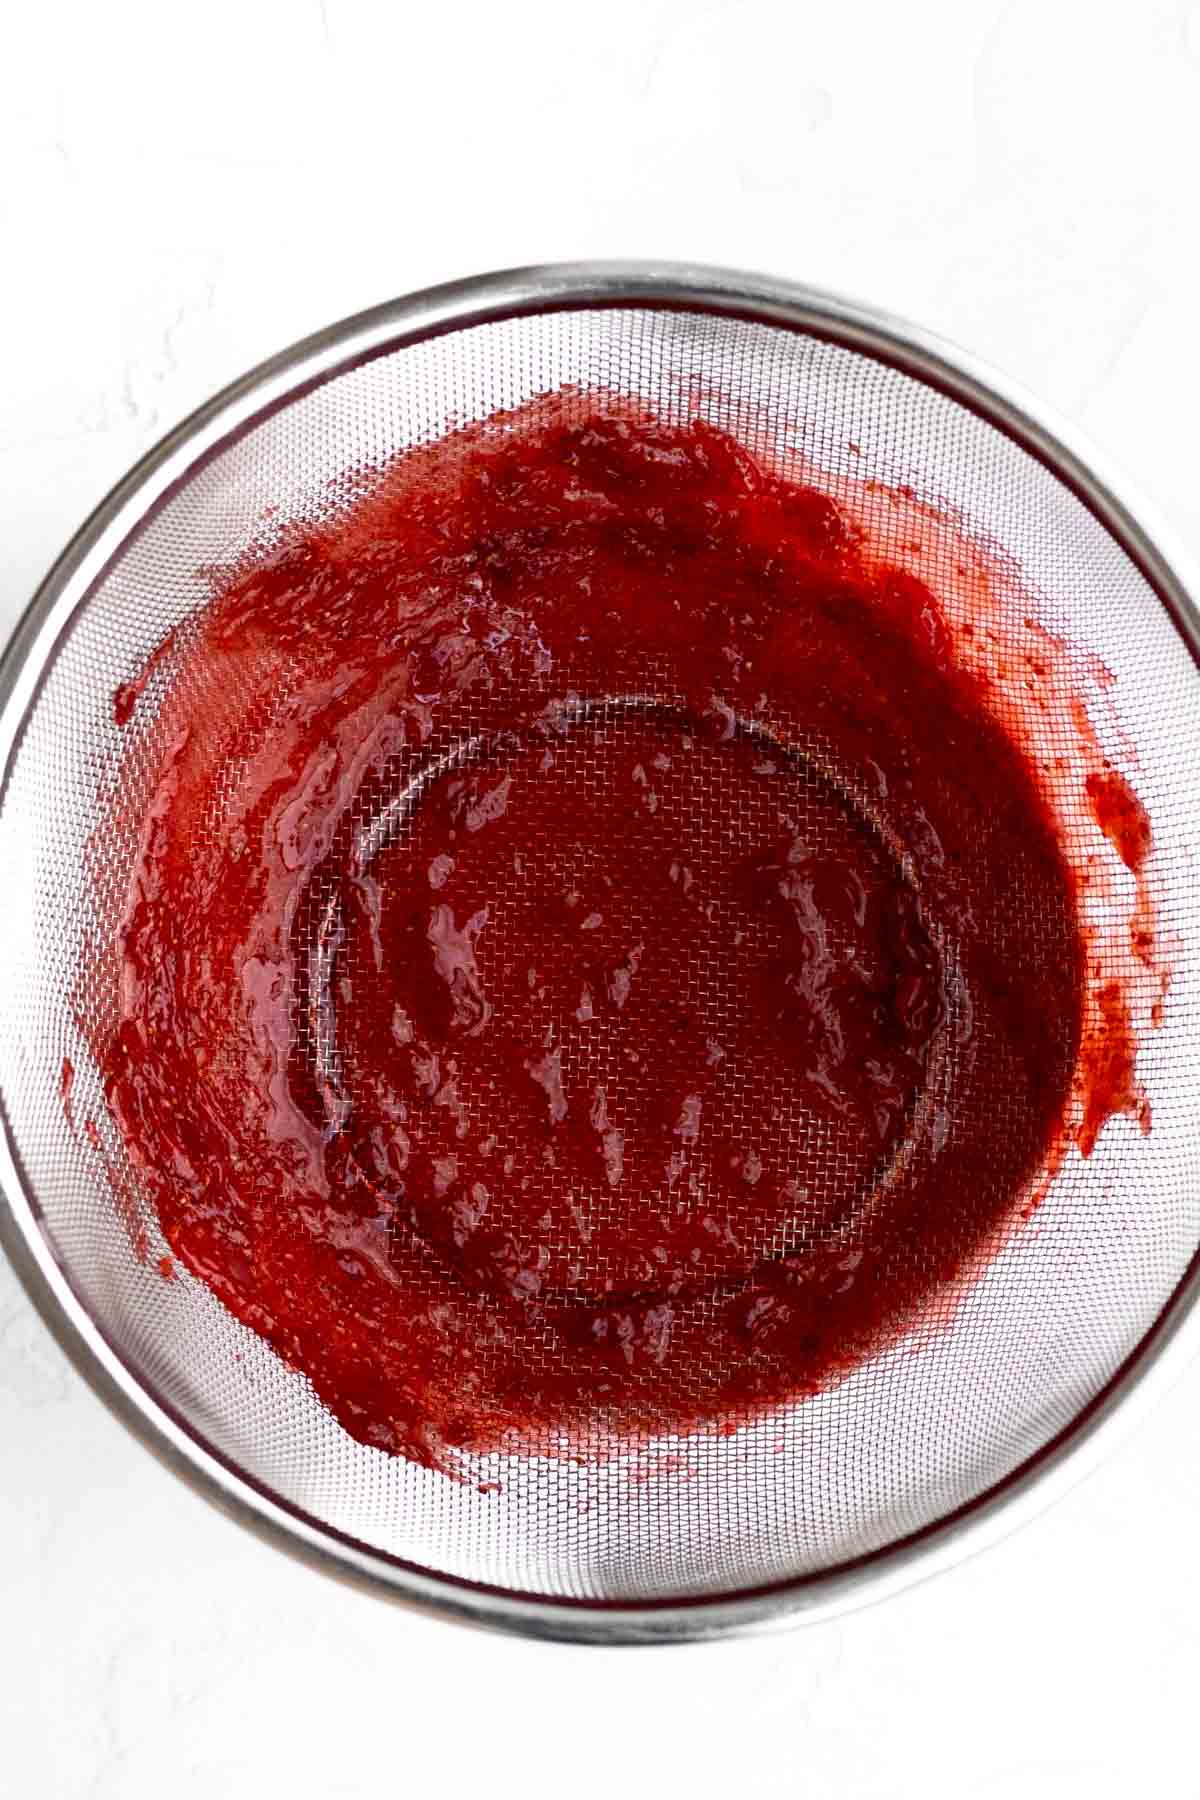 A strainer stained red from the strawberry puree.